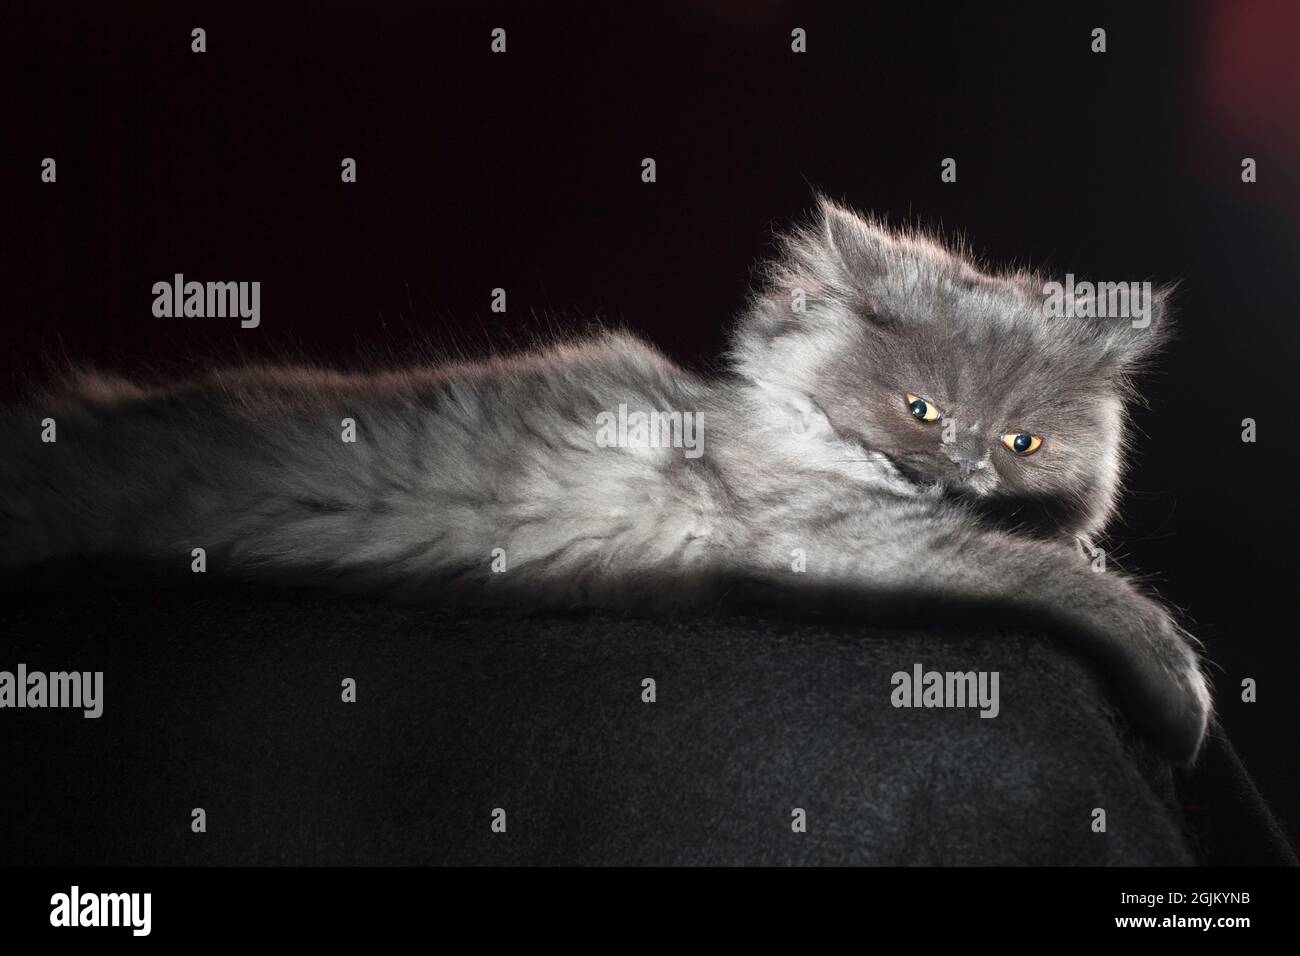 Hilariously angry looking fluffy grey long haired cat. Stock Photo